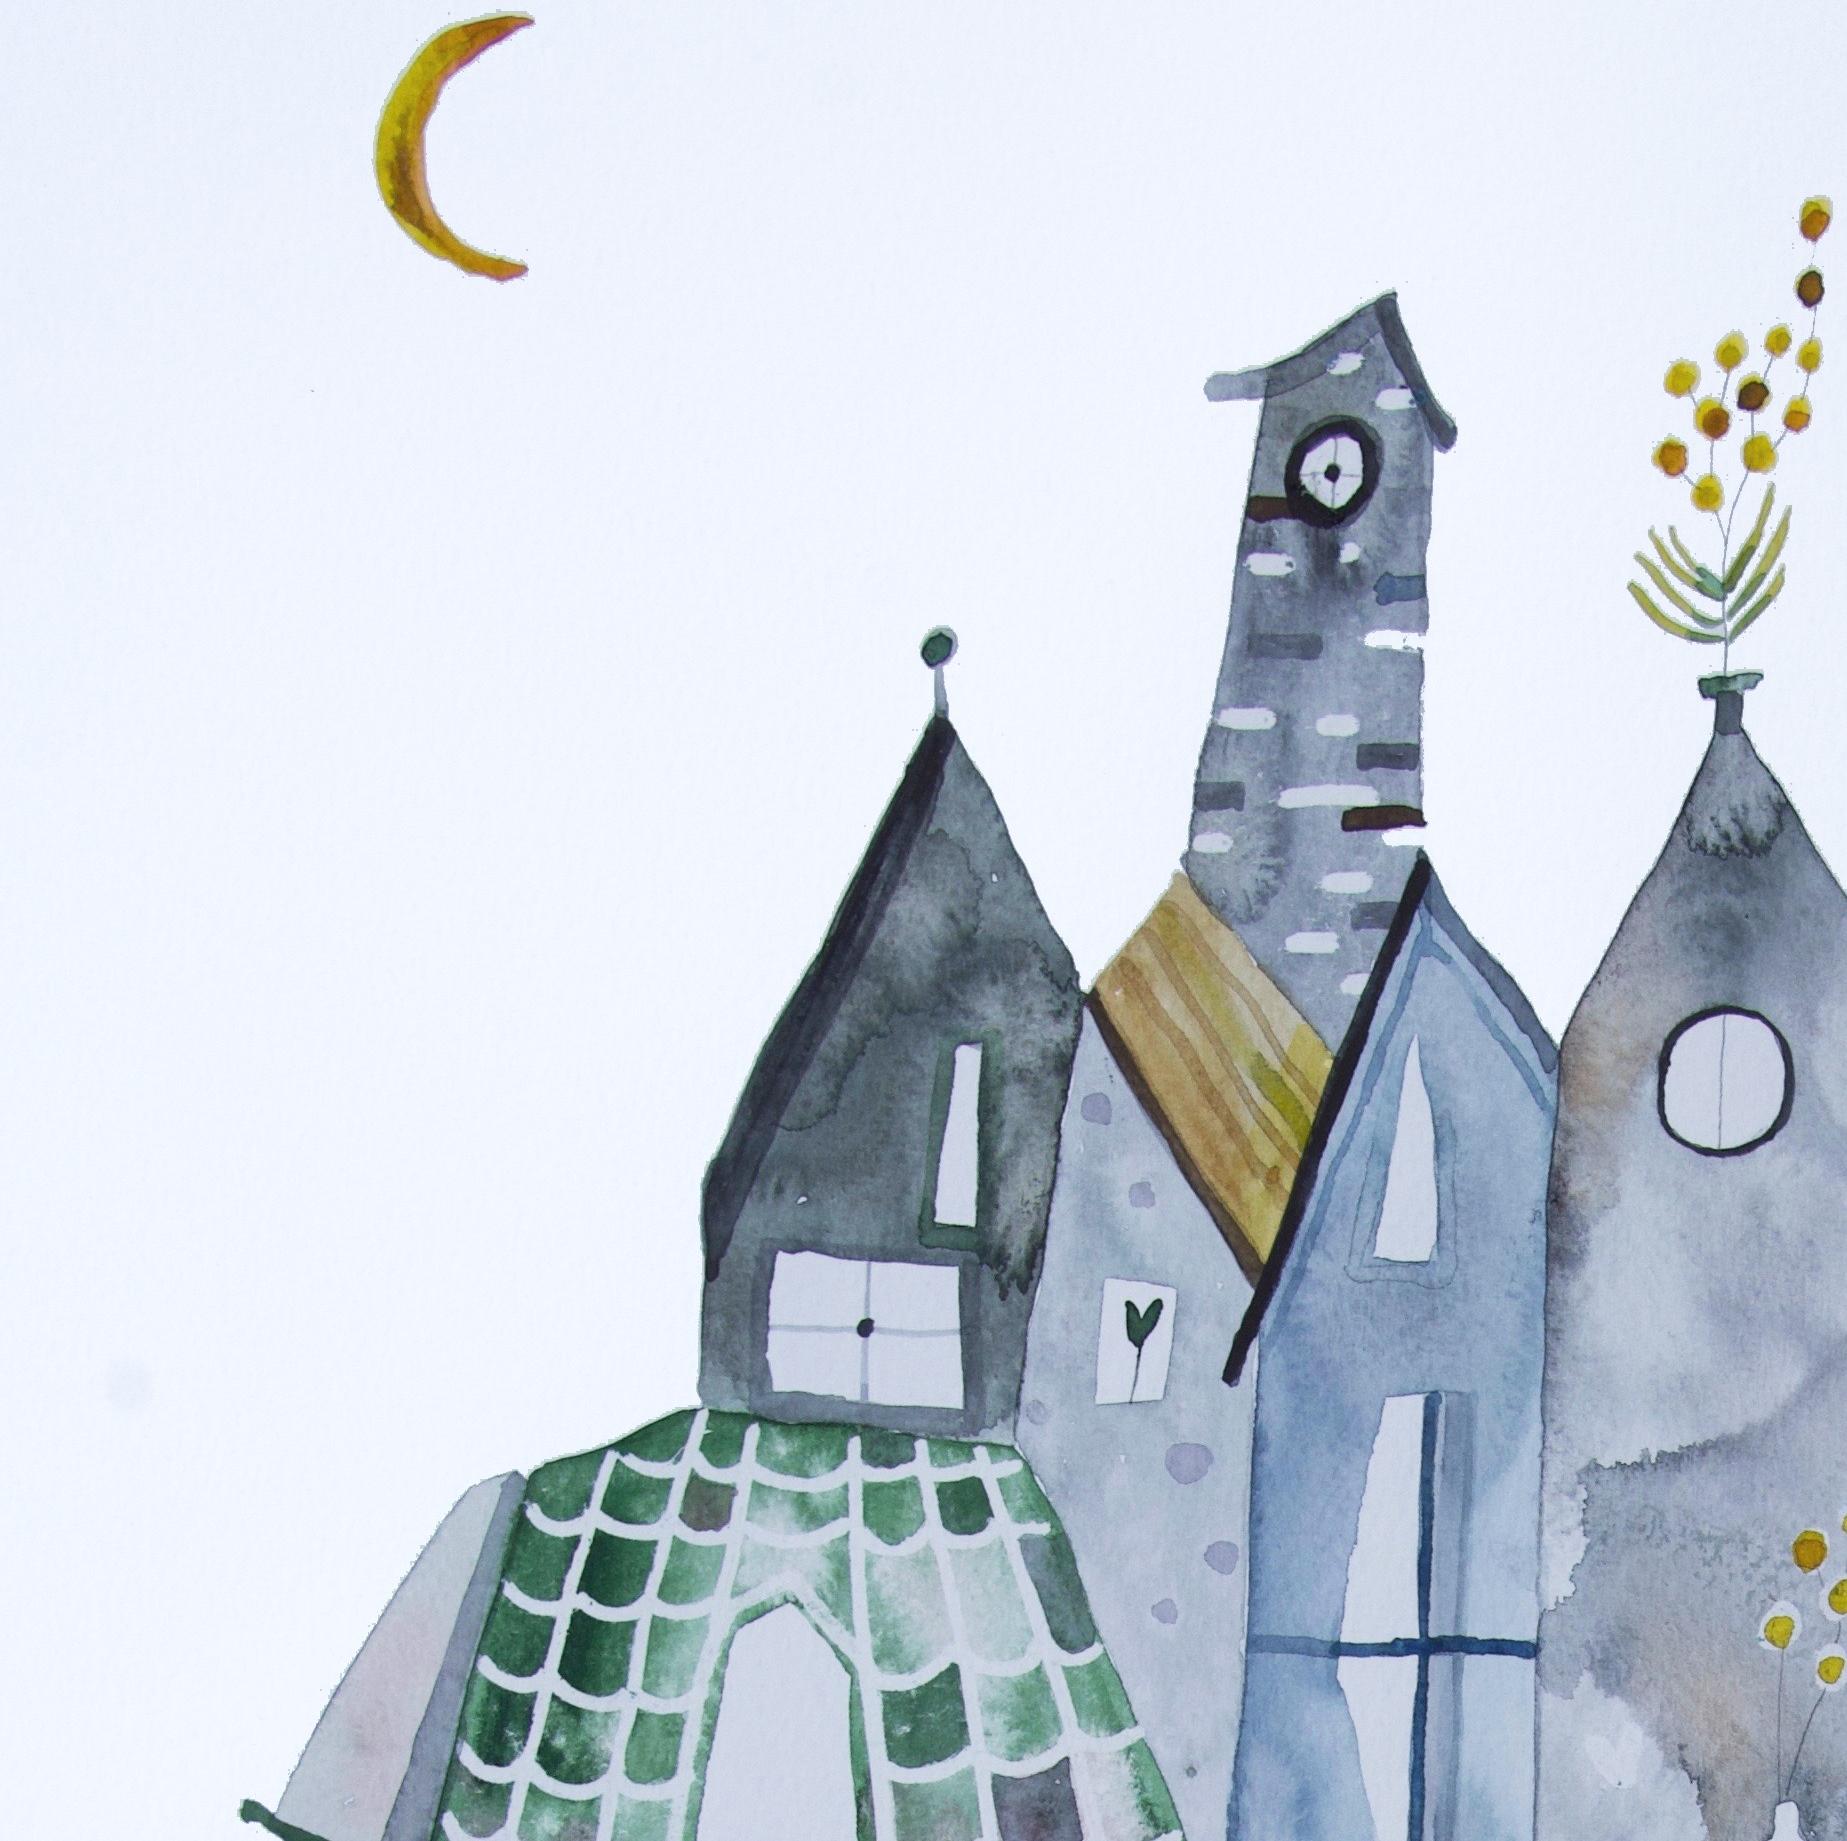 Maria C Bernhardsson is a colorful artist who lives and paints in Sweden. Most of her works are influenced by the architecture and geometry of houses. Bernhardsson travels the world photographing and sketching houses to use as
inspiration for her